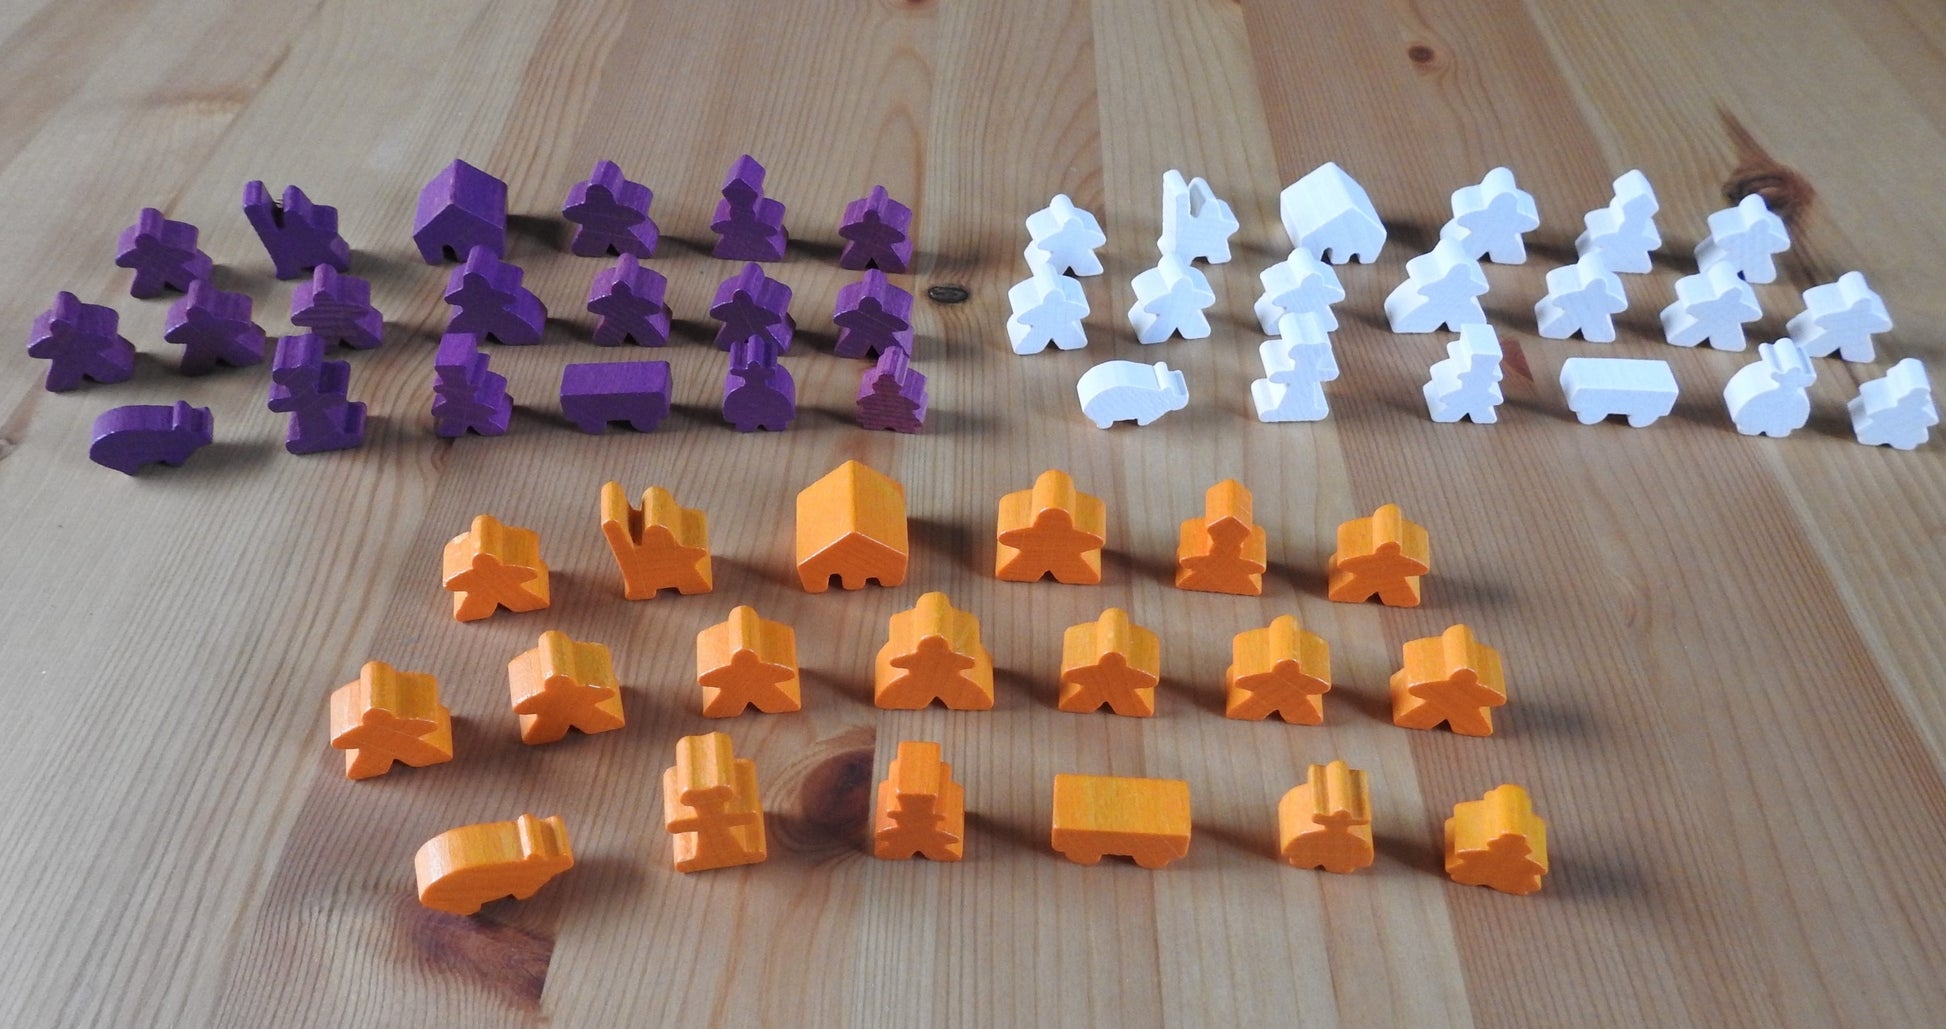 Top view of 3 of the differenet wooden meeple set colours available - orange, purple and white.